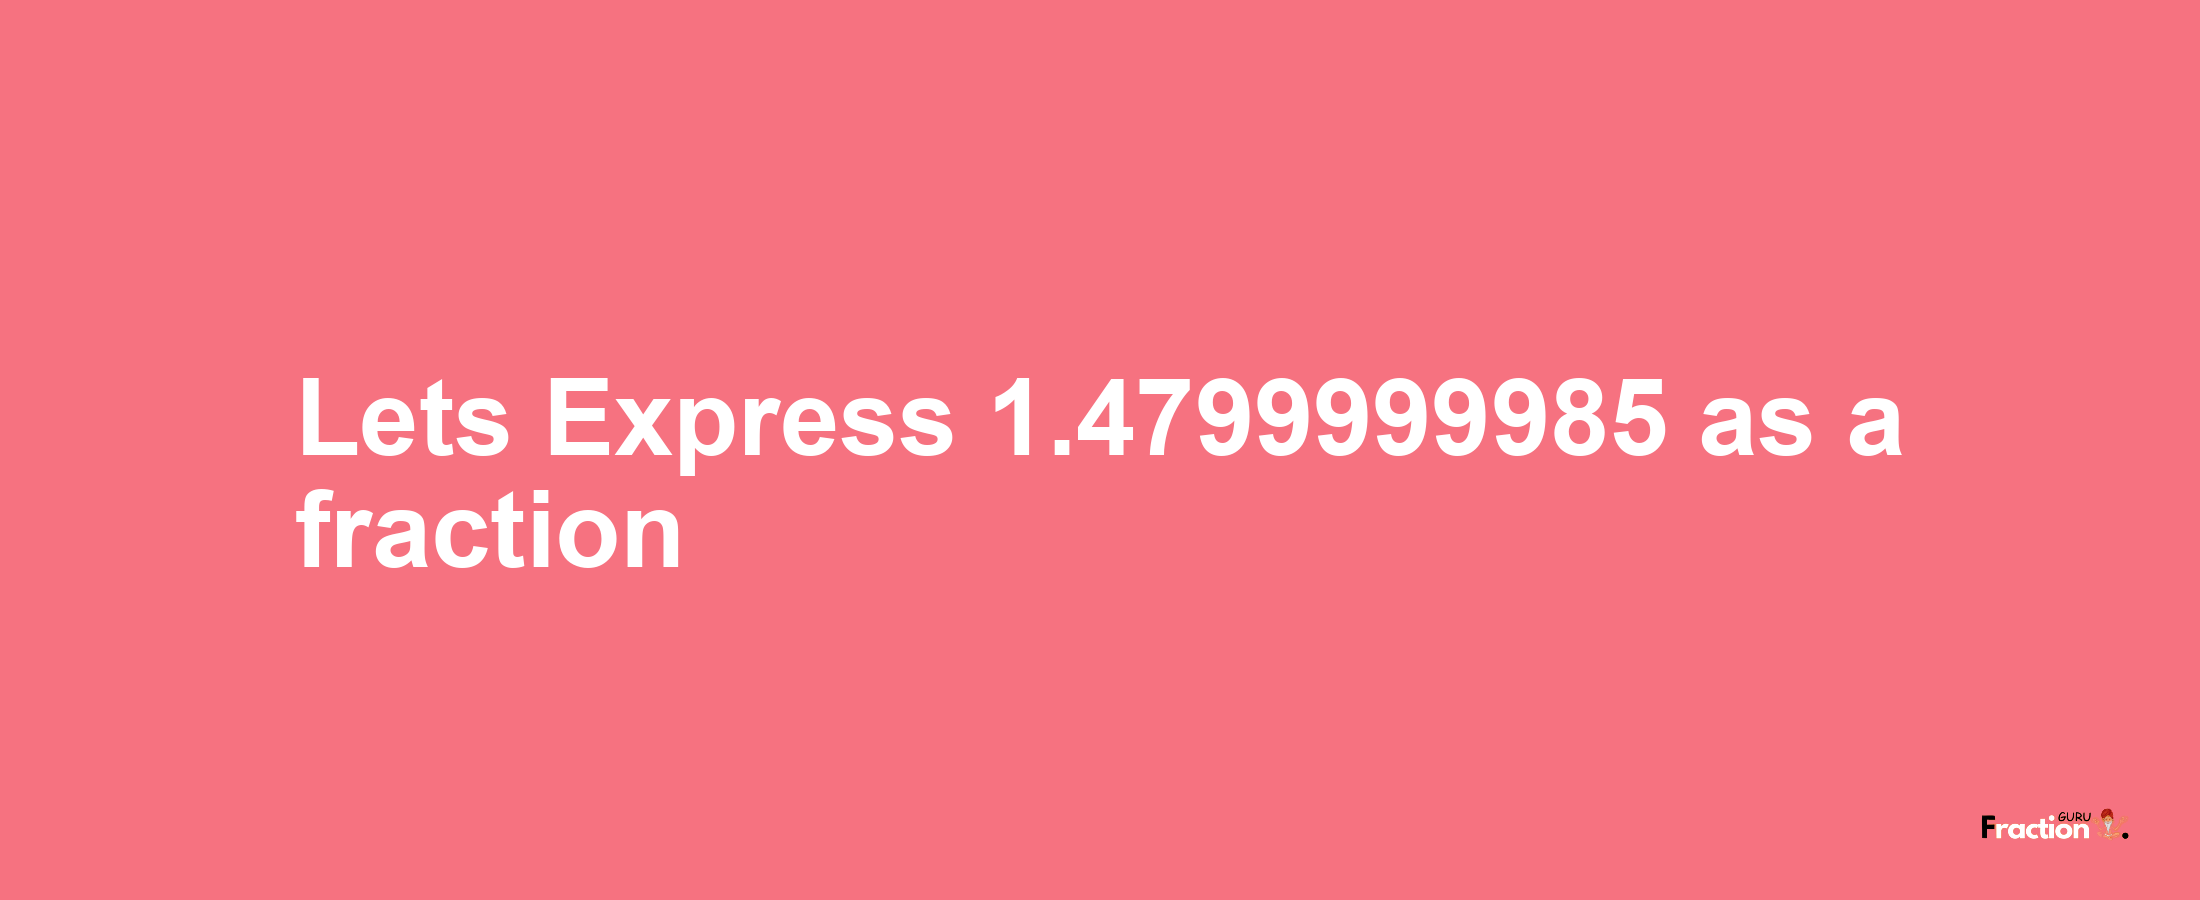 Lets Express 1.4799999985 as afraction